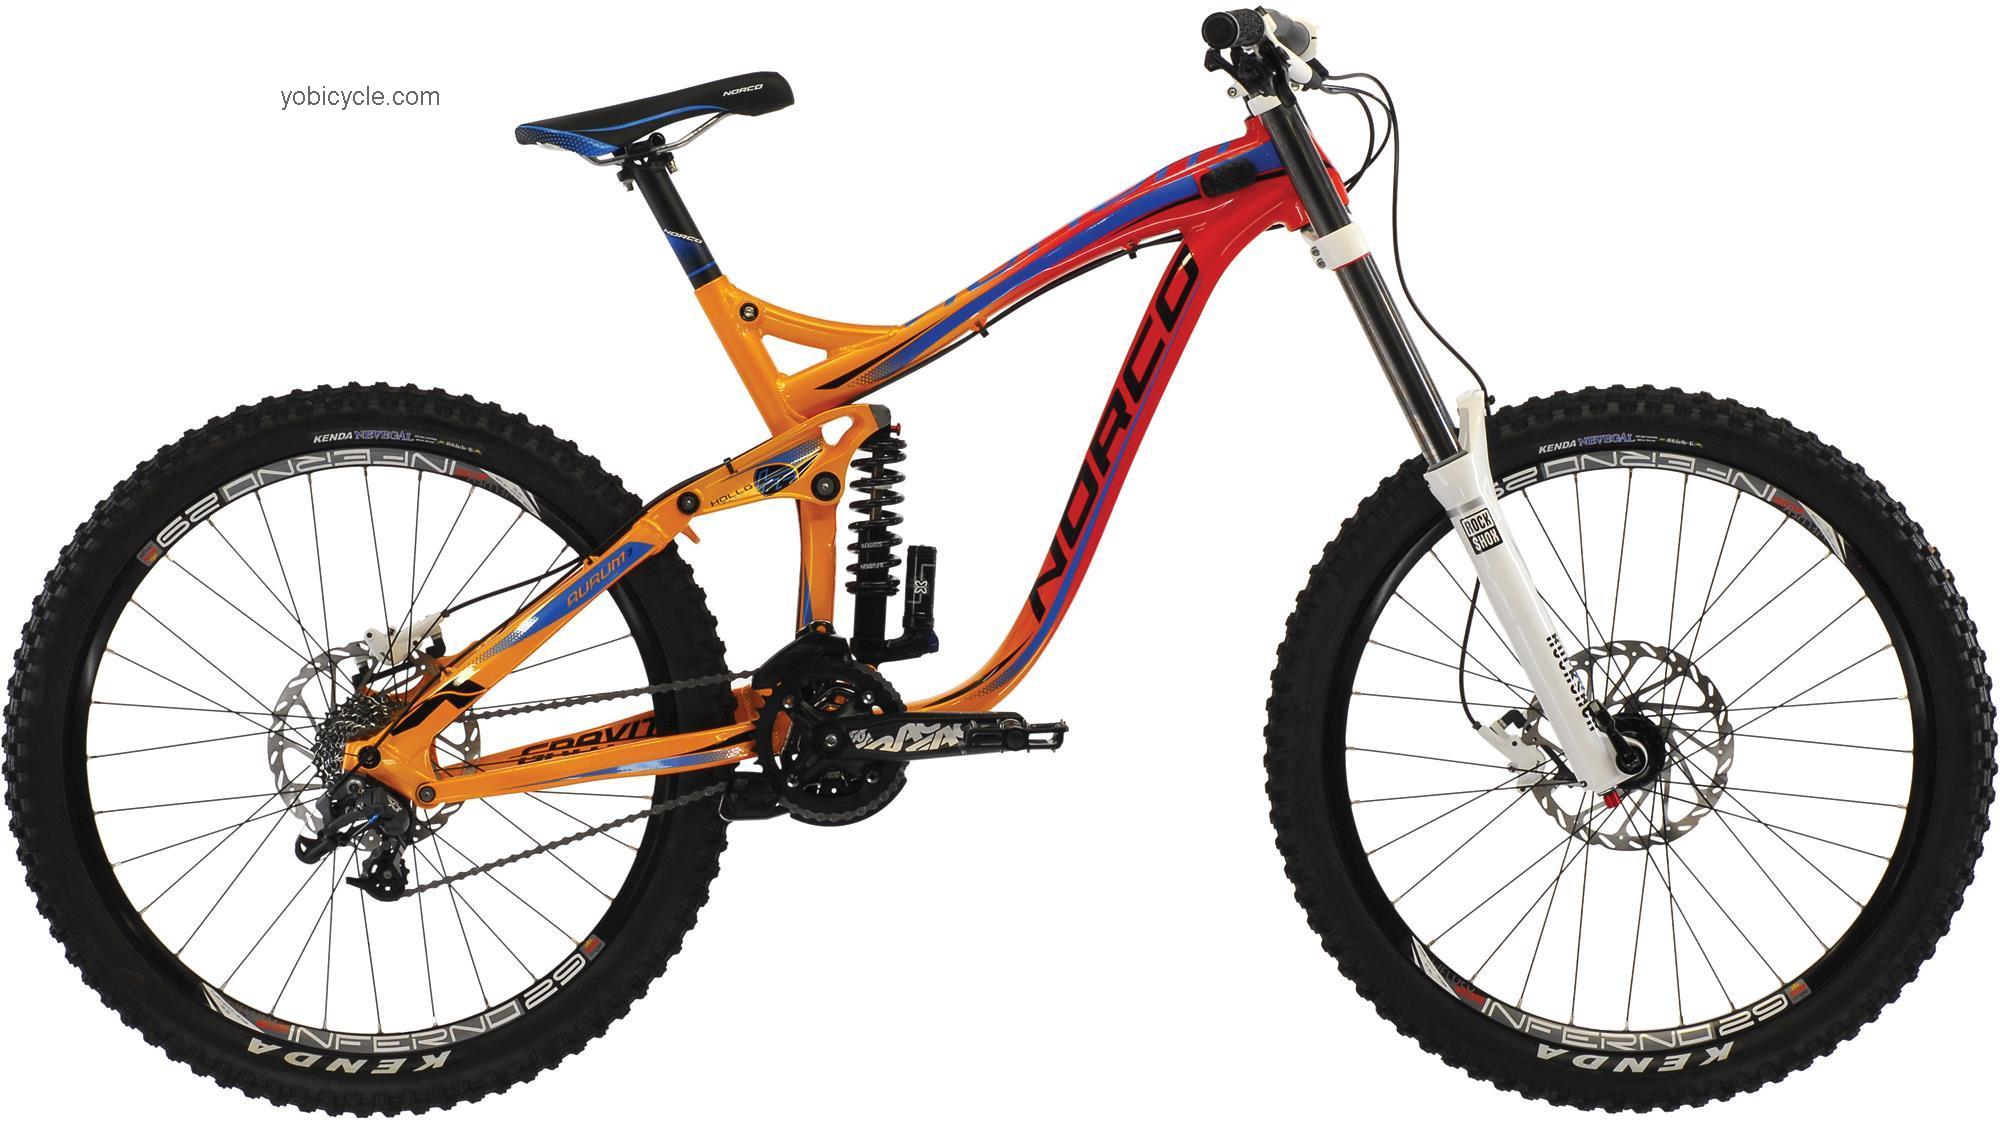 Norco Aurom 3 2013 comparison online with competitors